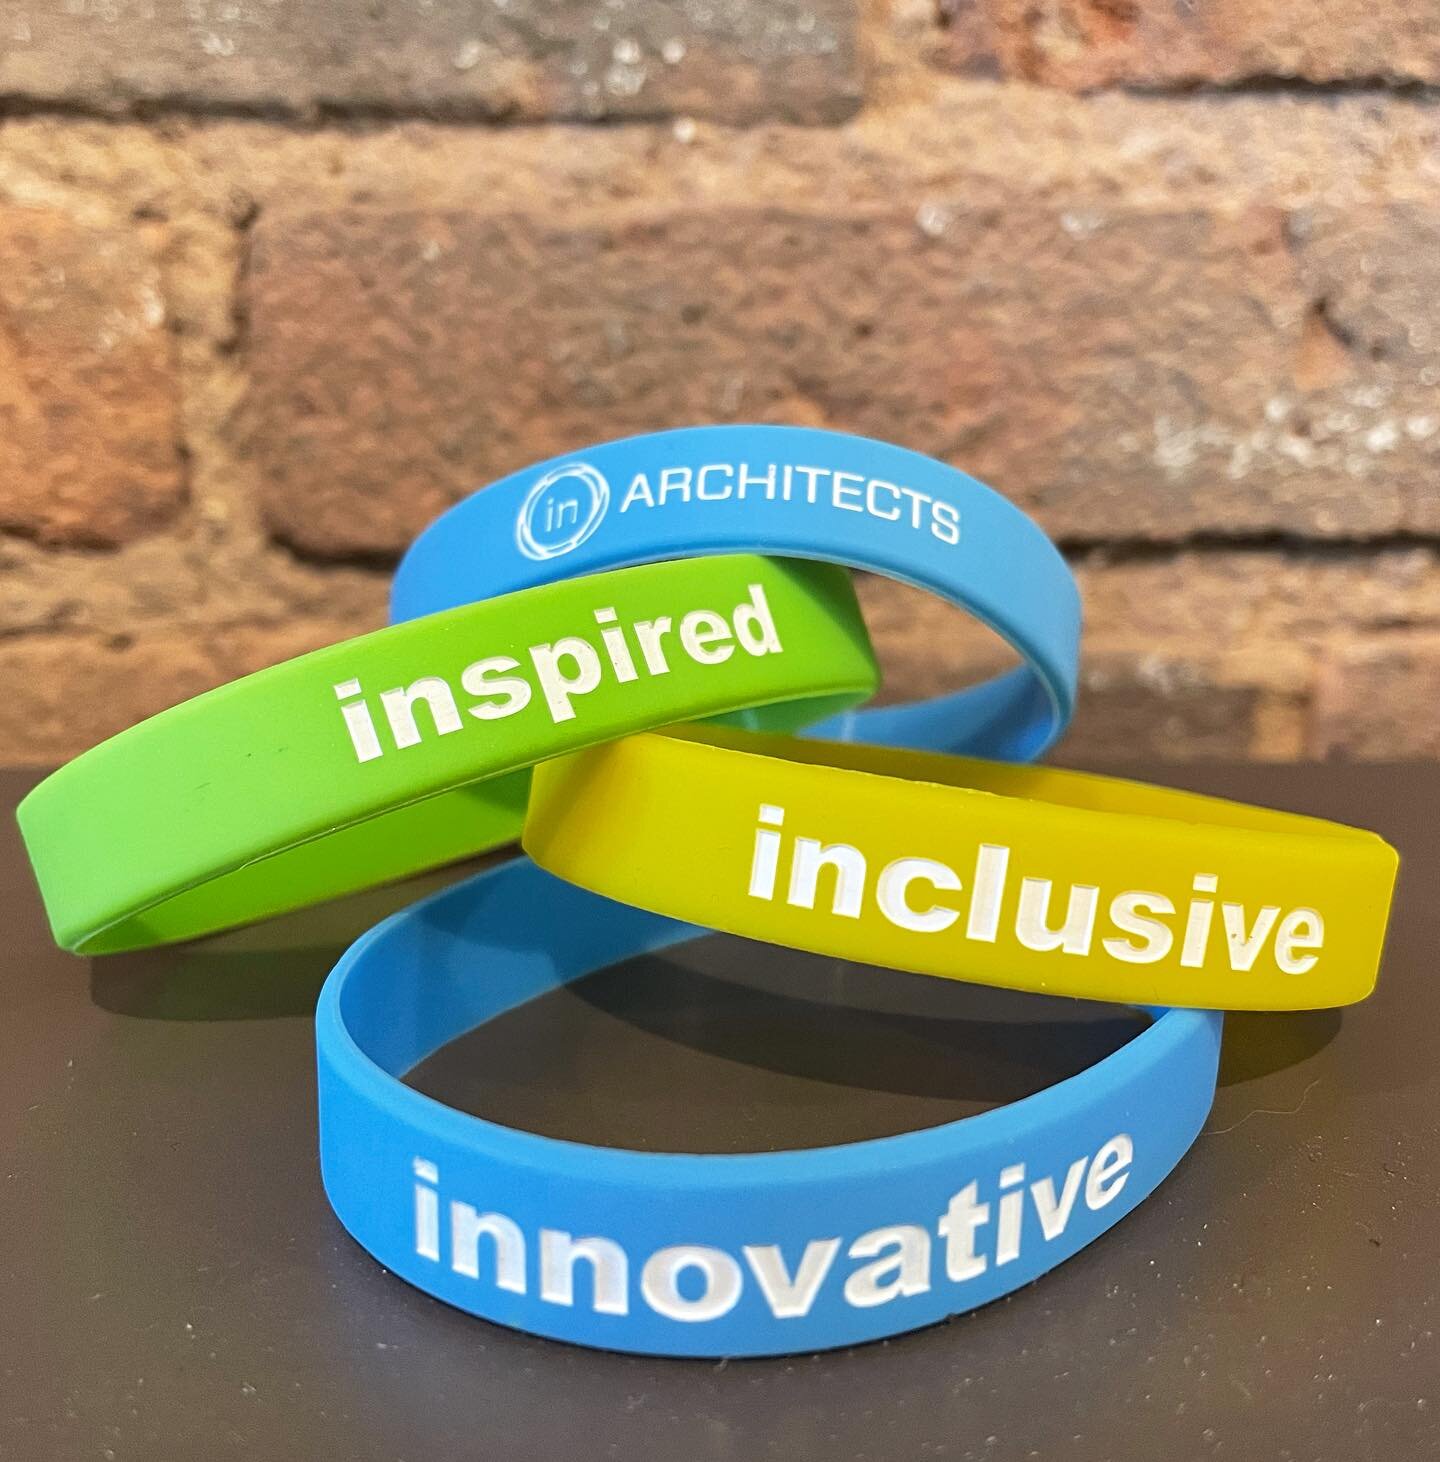 Are you IN?
.
.
#architecture #interiordesign #design #in #inspired #inclusive #innovative #inarchitects #areyouin? #office #architecturefirm #architects #designers #team #teamwork #syracuse #syracuseny #smallbusiness